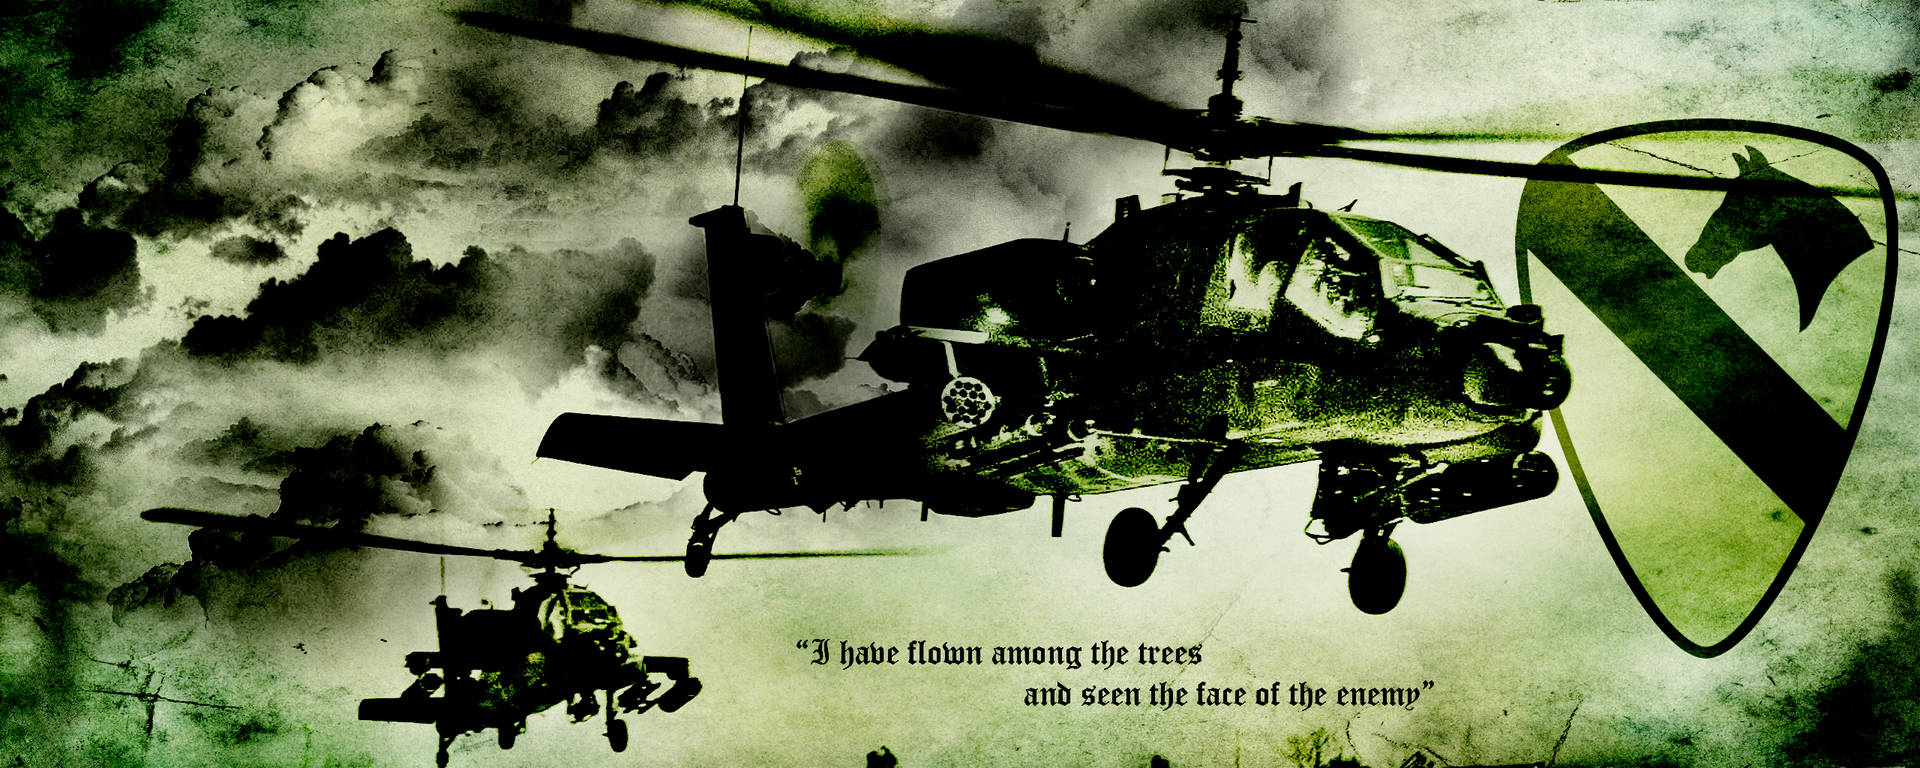 Quote About Attack Helicopter 4k